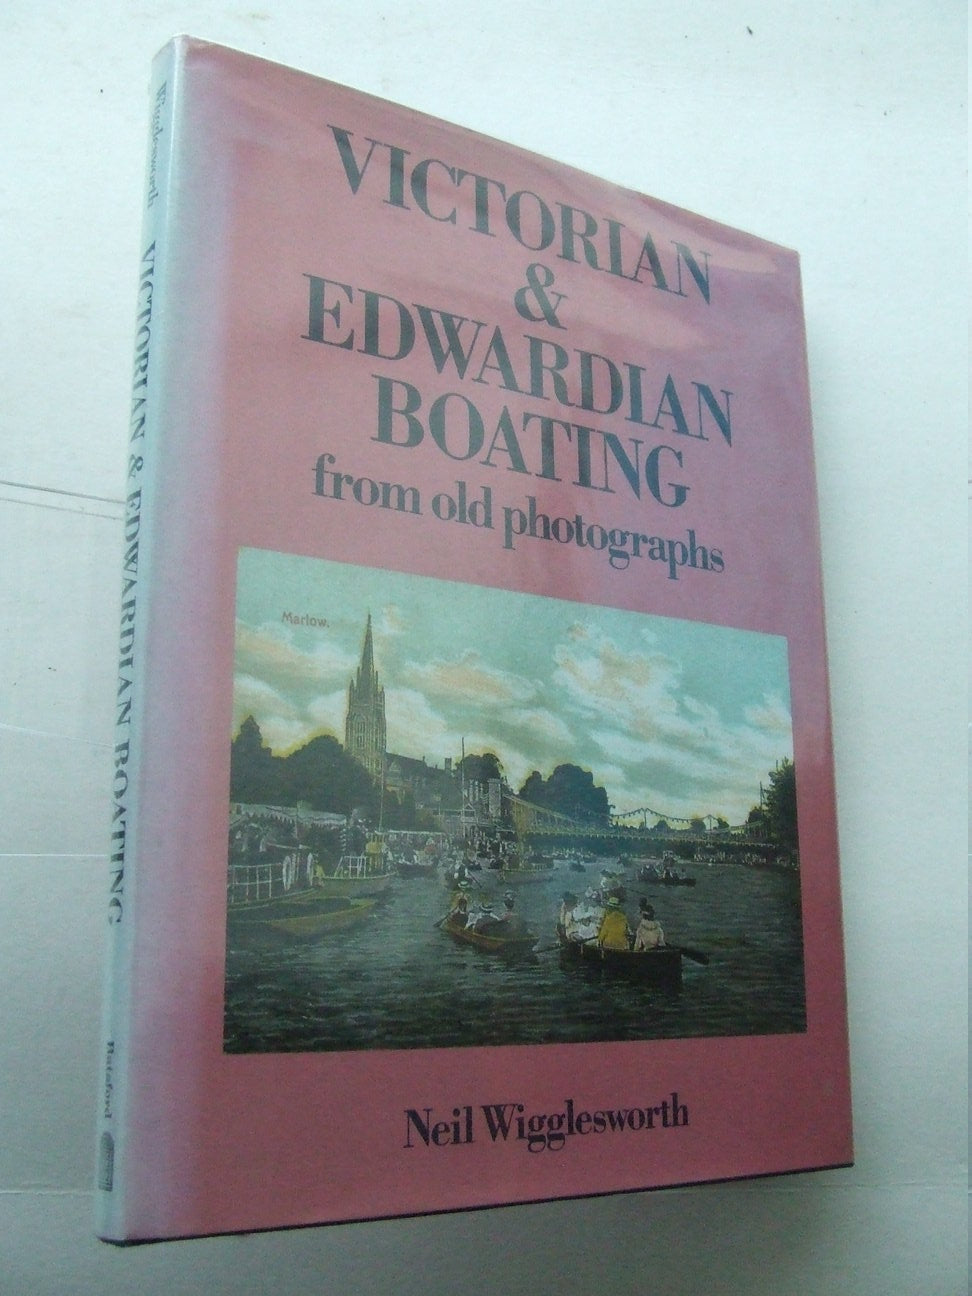 Victorian & Edwardian Boating from Old Photographs